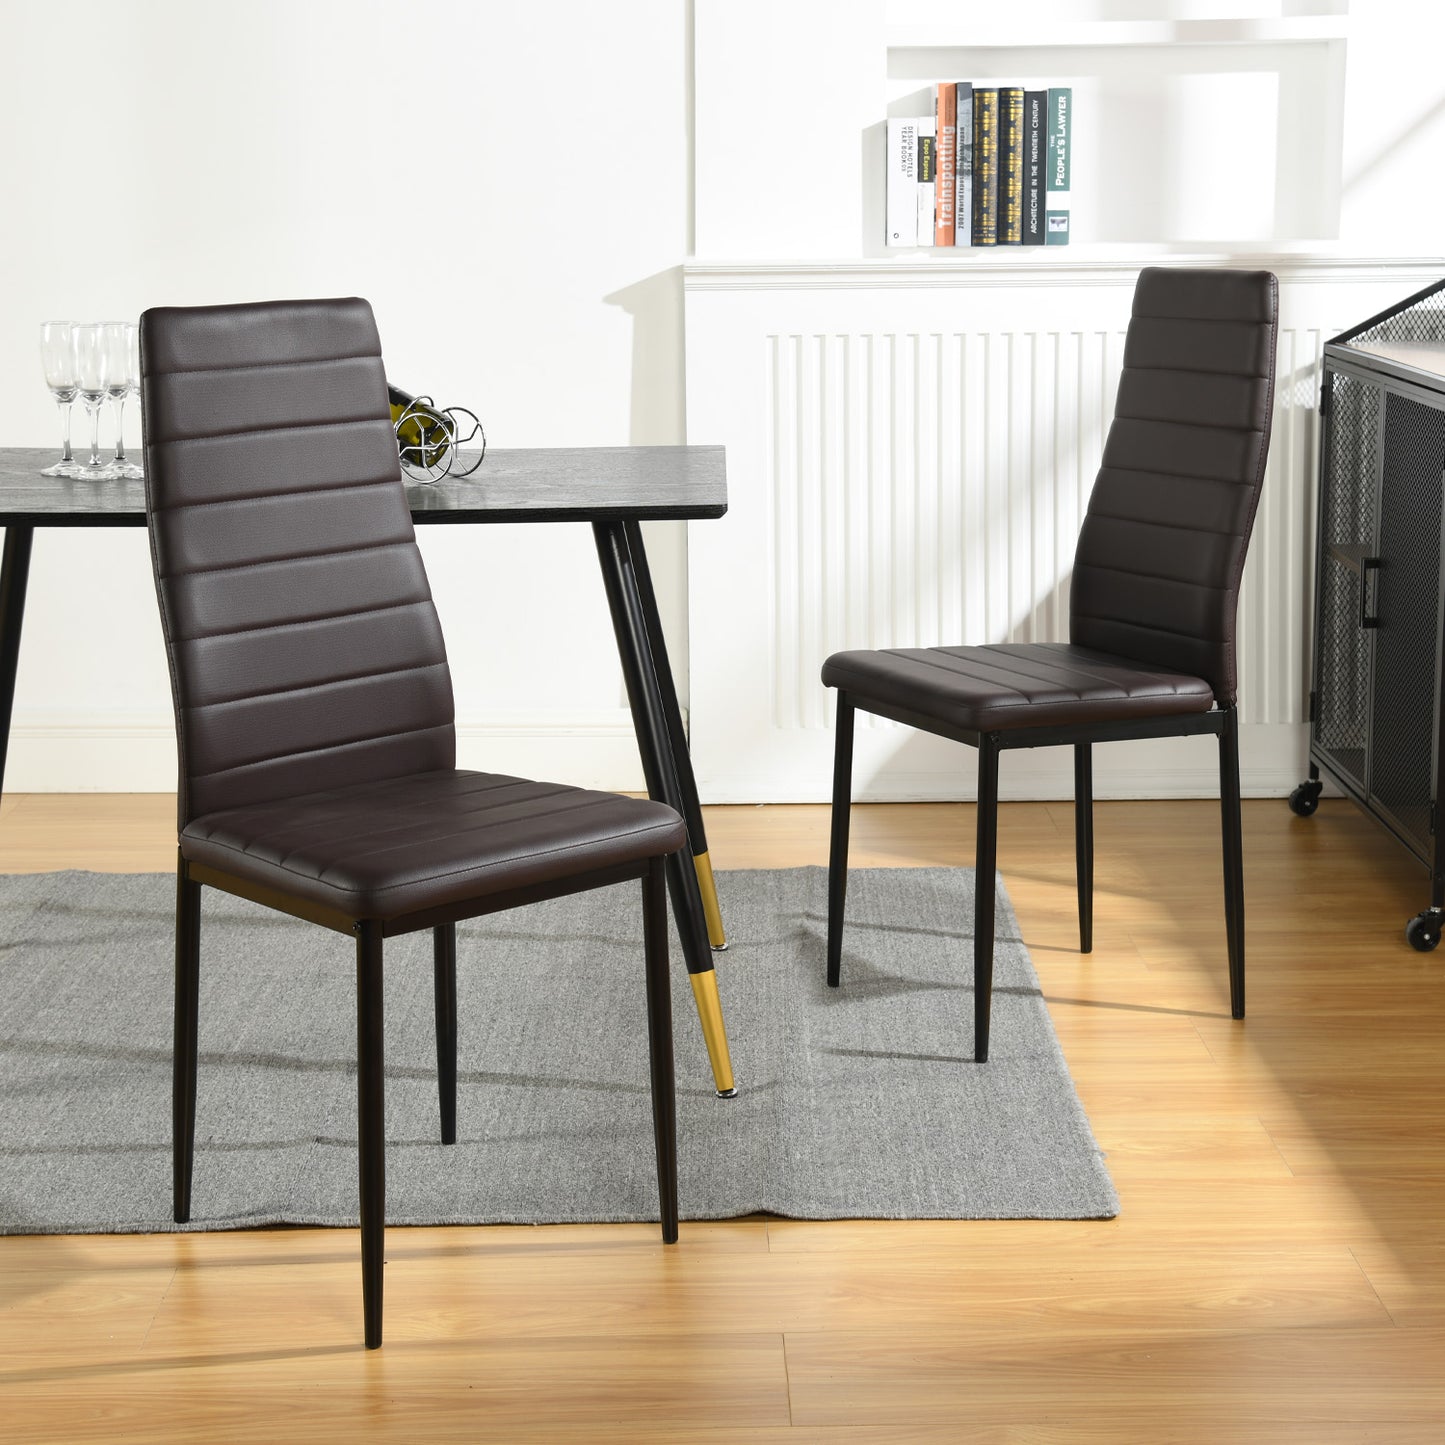 ANN Upholstered Dining Chair with Iron Legs - Brown